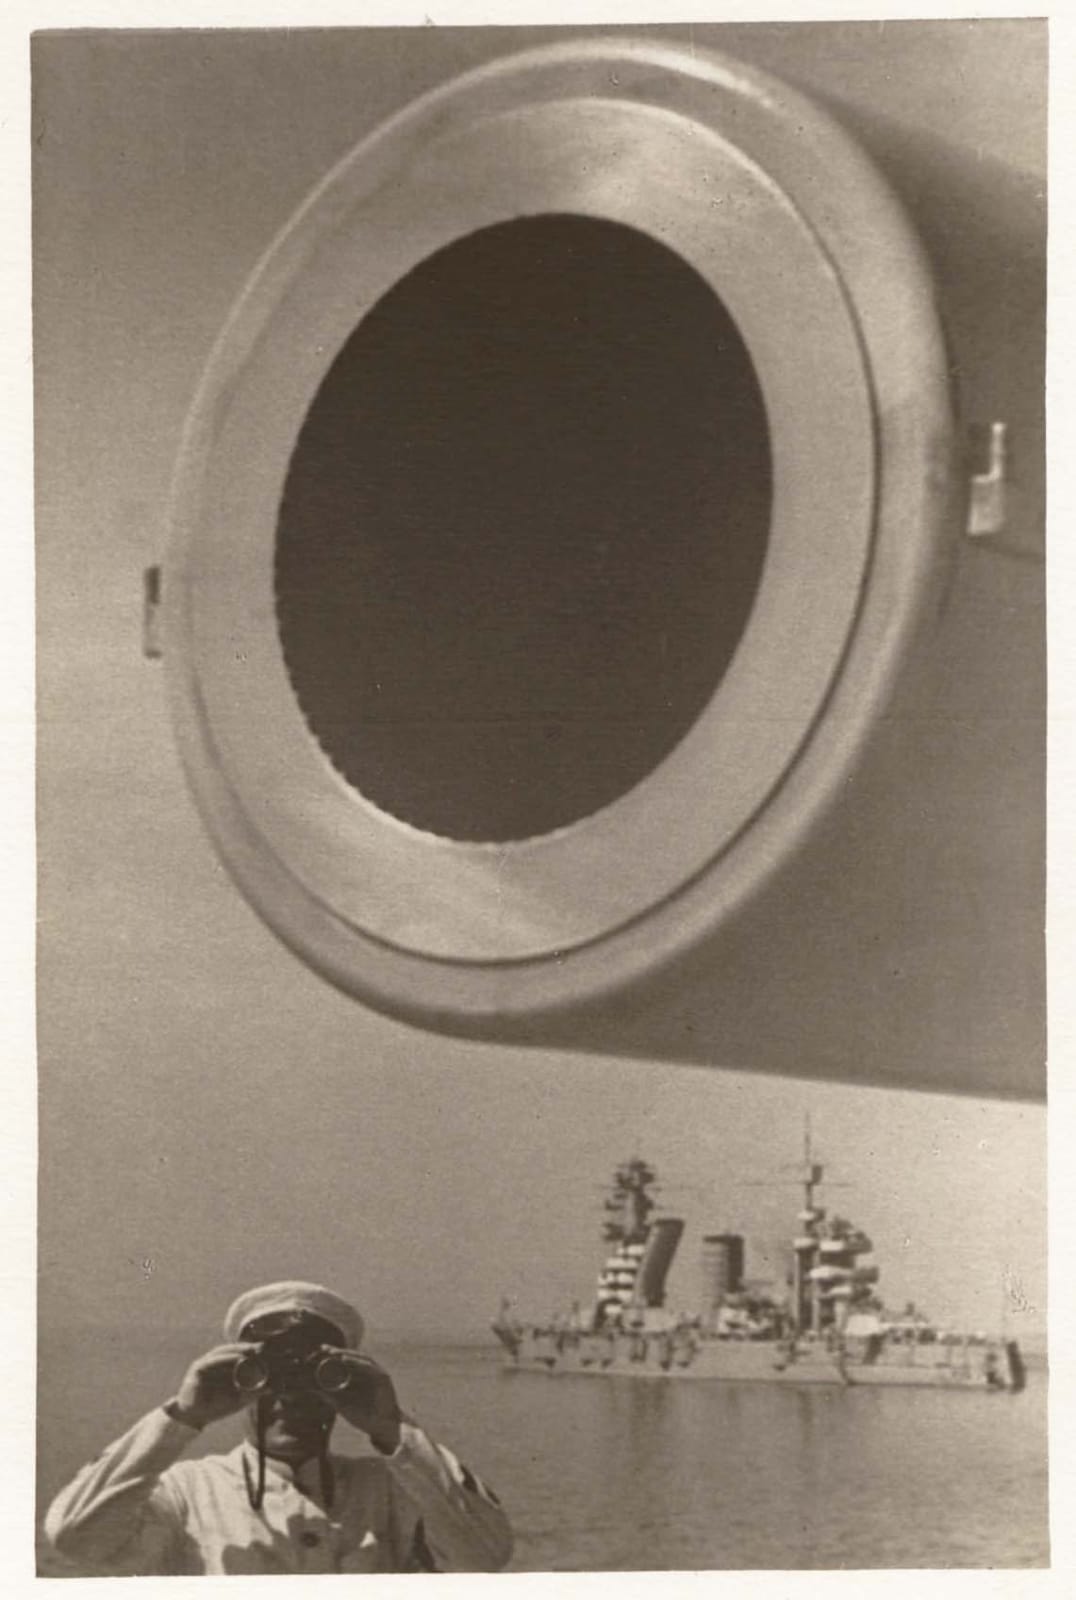 Yakov Khalip On Guard (Large-Bore Cannon), Baltic Fleet man looking through binoculars under huge cannon with ship in background